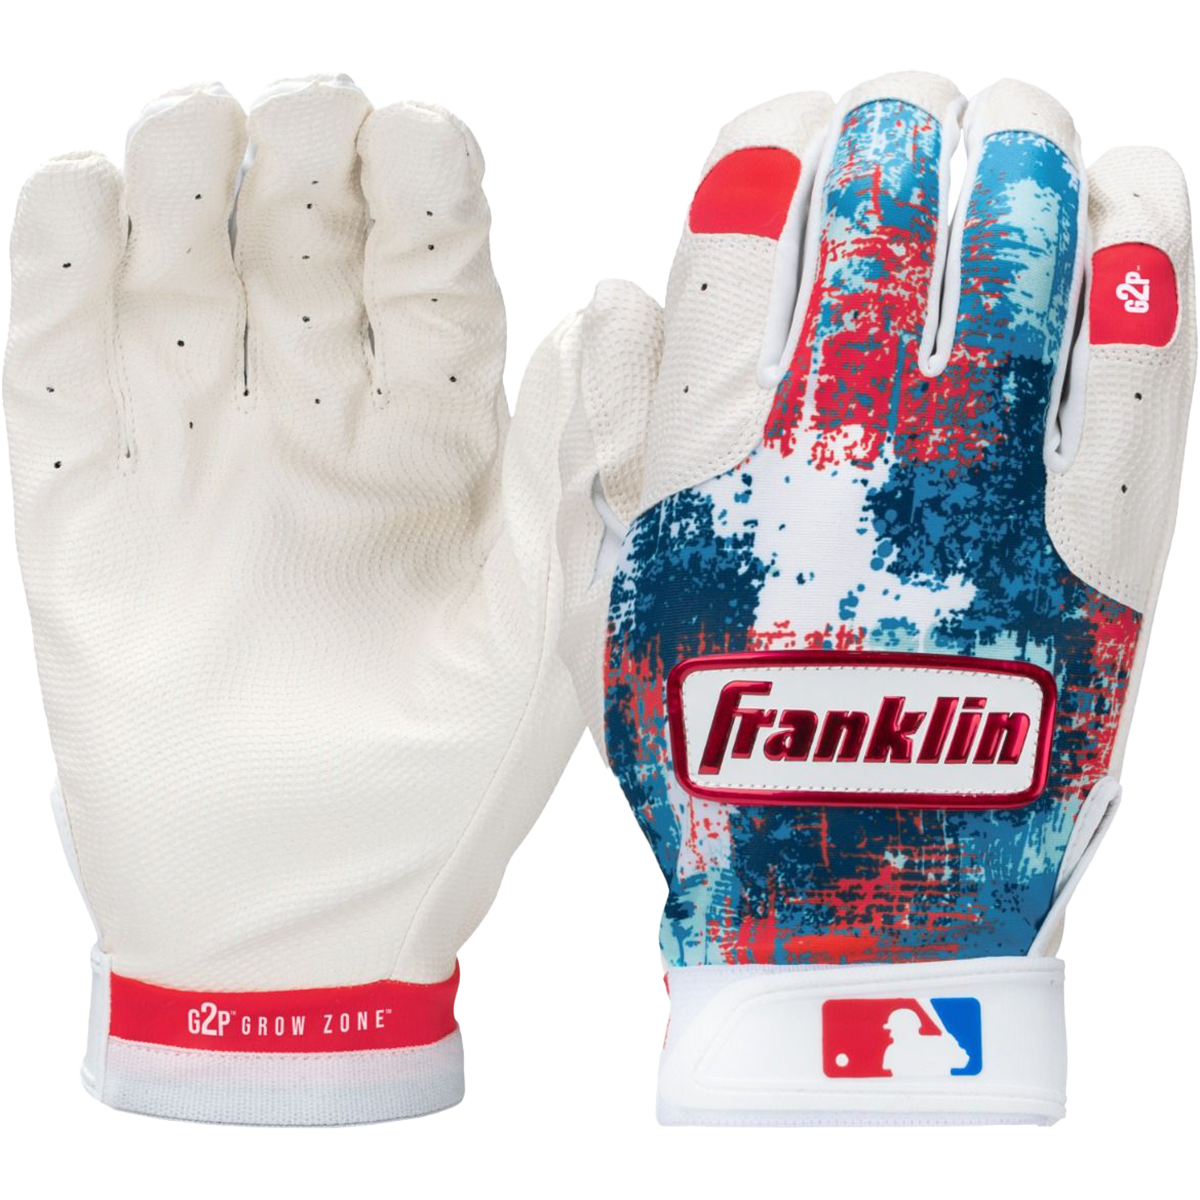 Youth Grow-To-Pro Tee Ball Batting Gloves alternate view